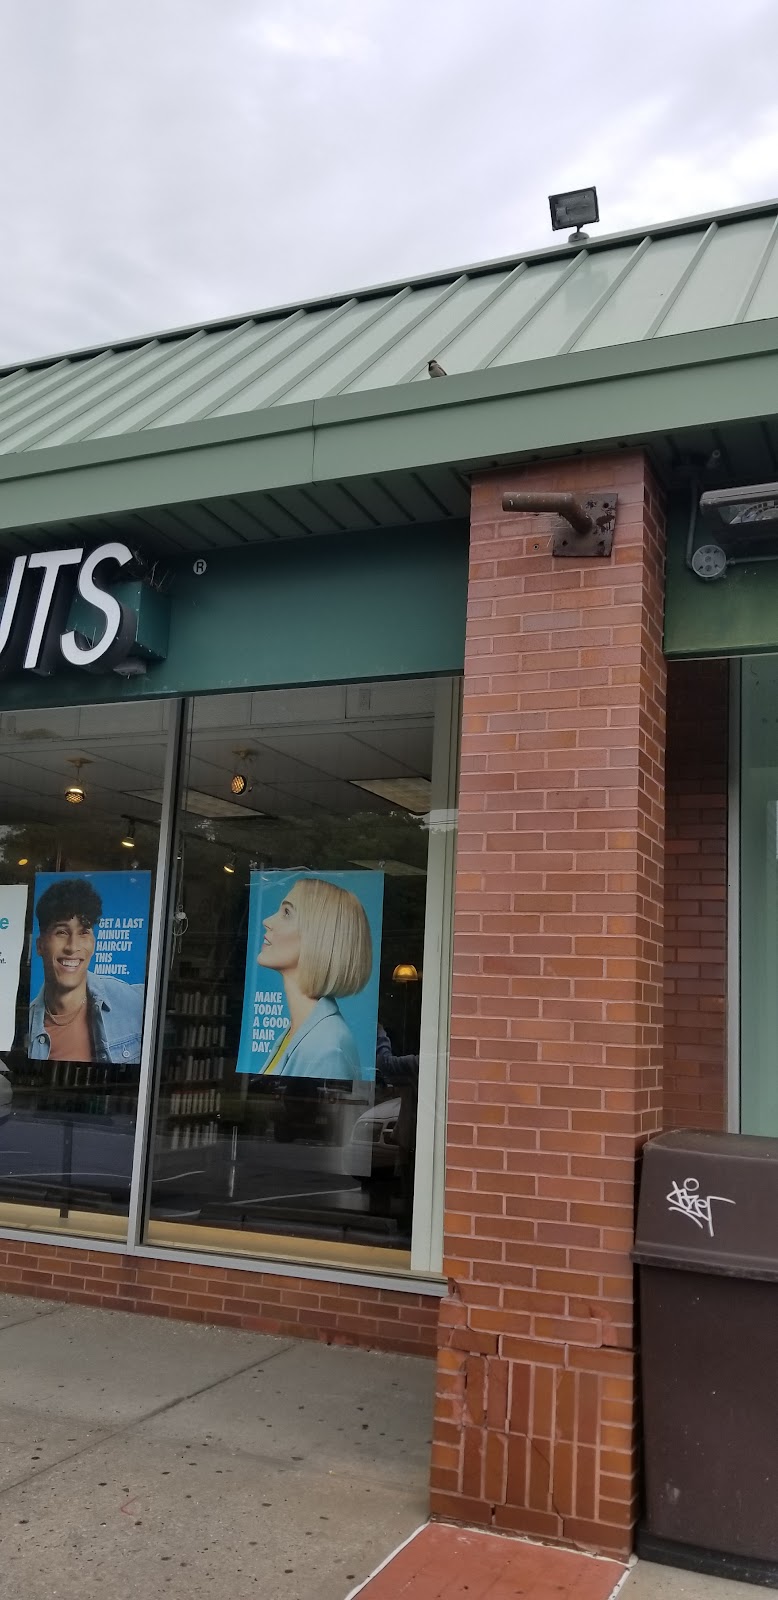 Supercuts | 658 Central Park Ave, Scarsdale, NY 10583 | Phone: (914) 472-0202